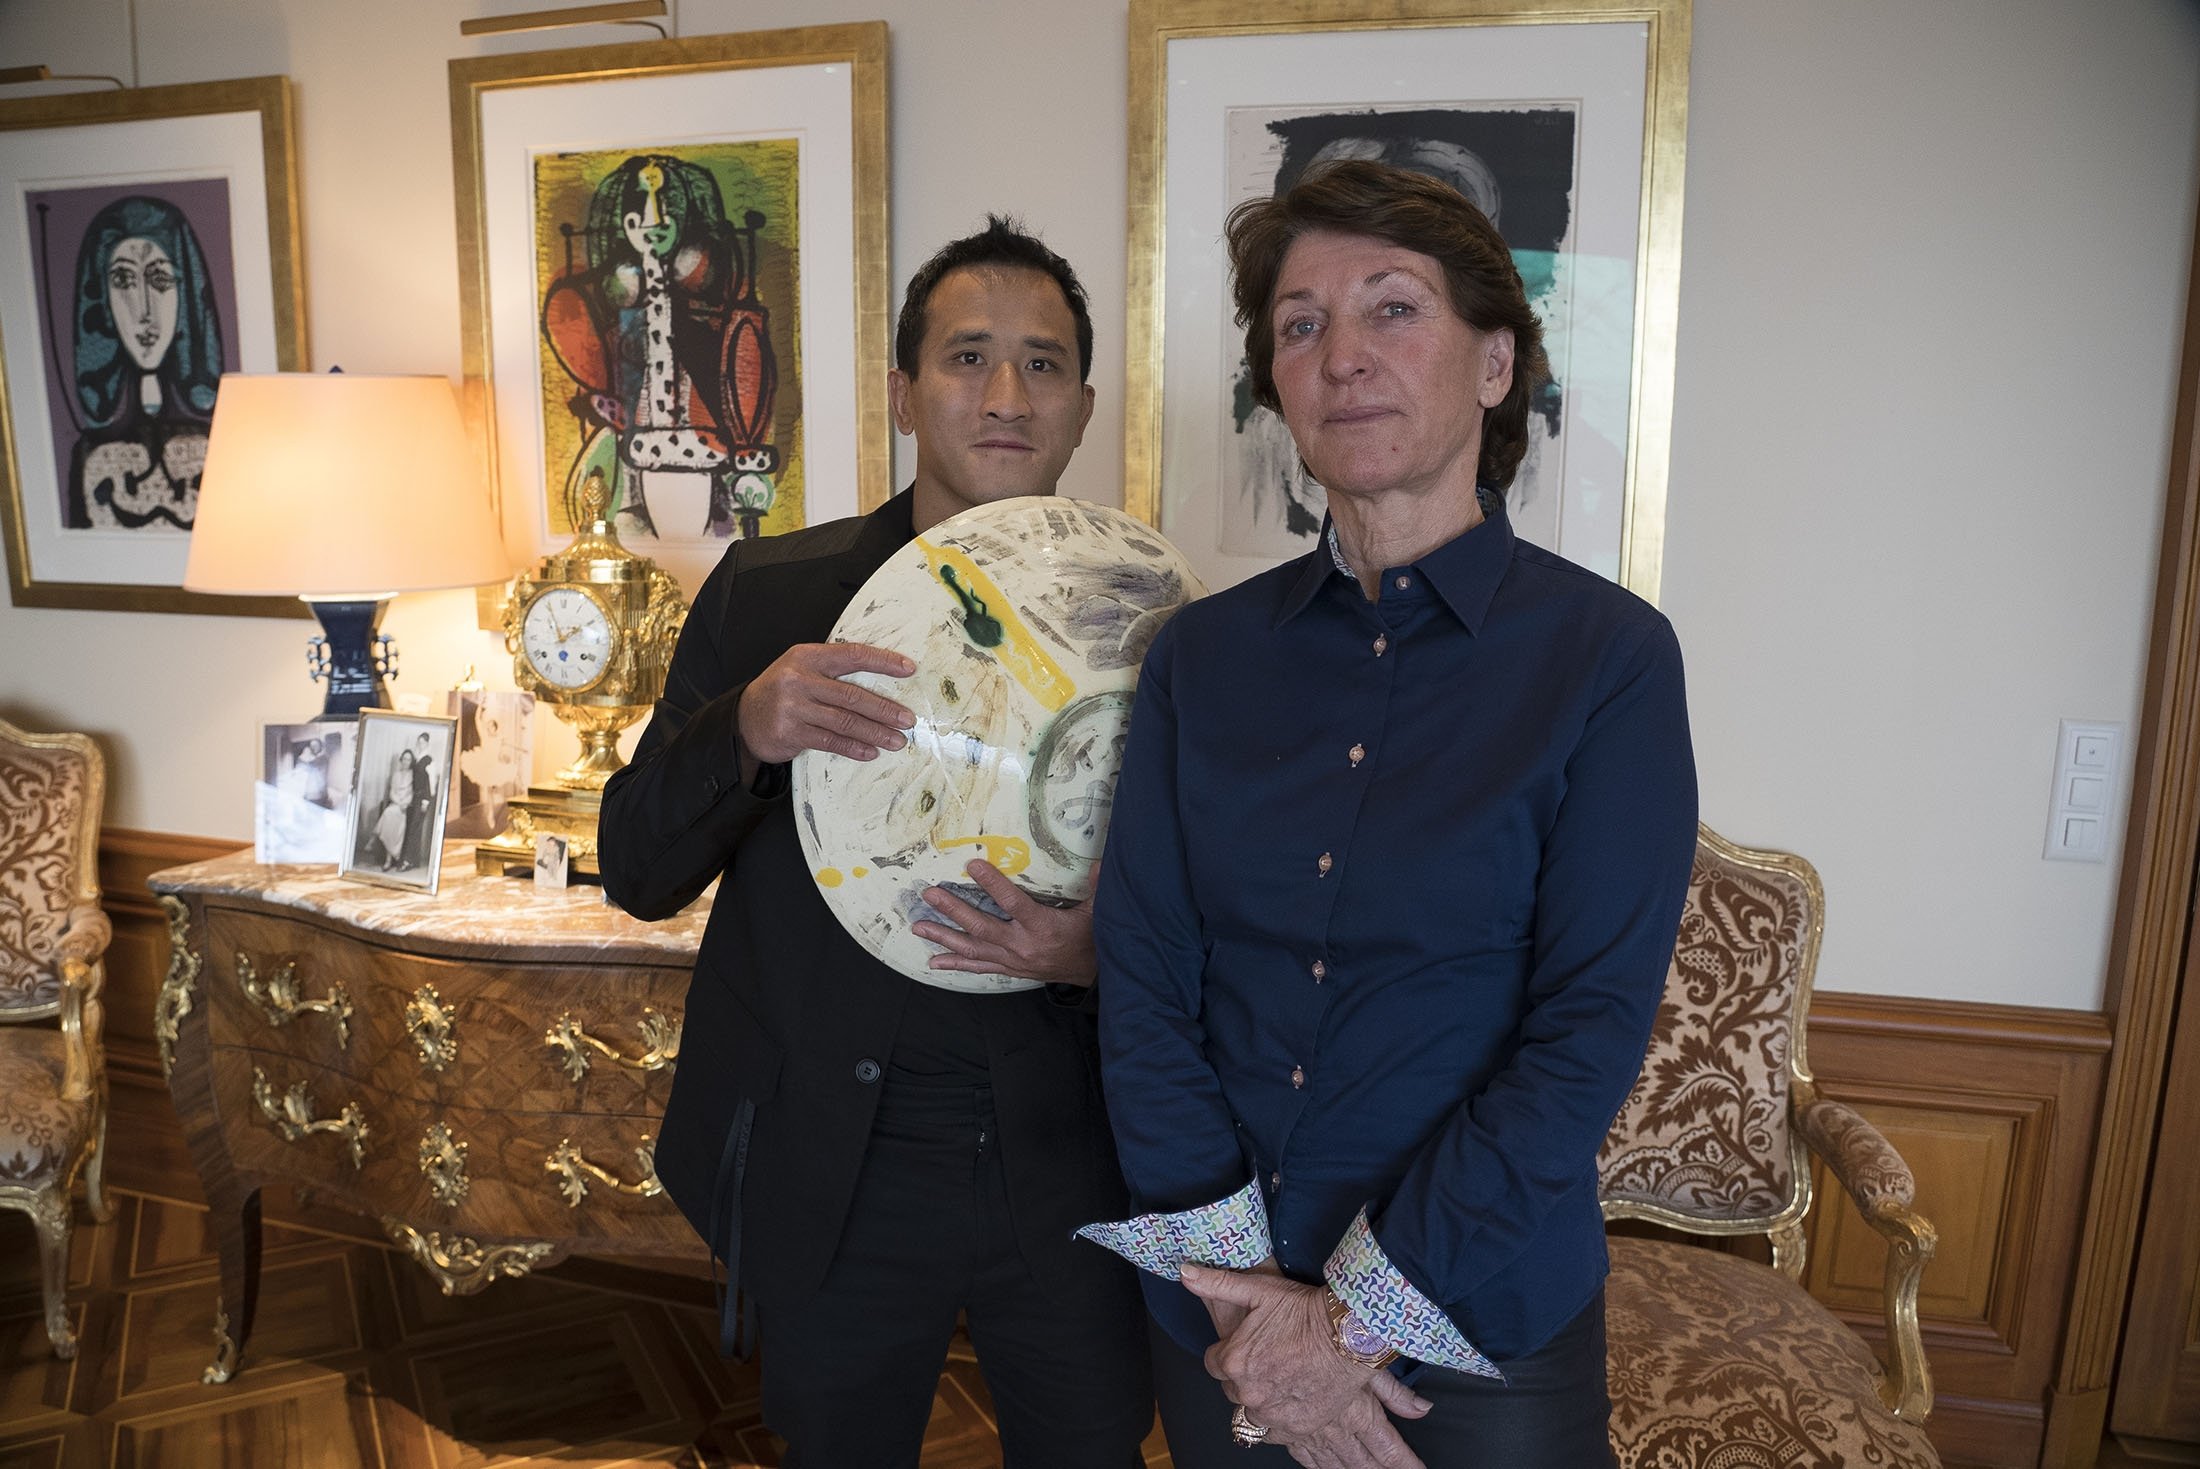 Marina Picasso (R), granddaughter of artist Pablo Picasso, and her son Florian Picasso pose with a ceramic art-work of Pablo Picasso in Cologny near in Geneva, Switzerland, Jan. 25, 2022. (AP Photo)